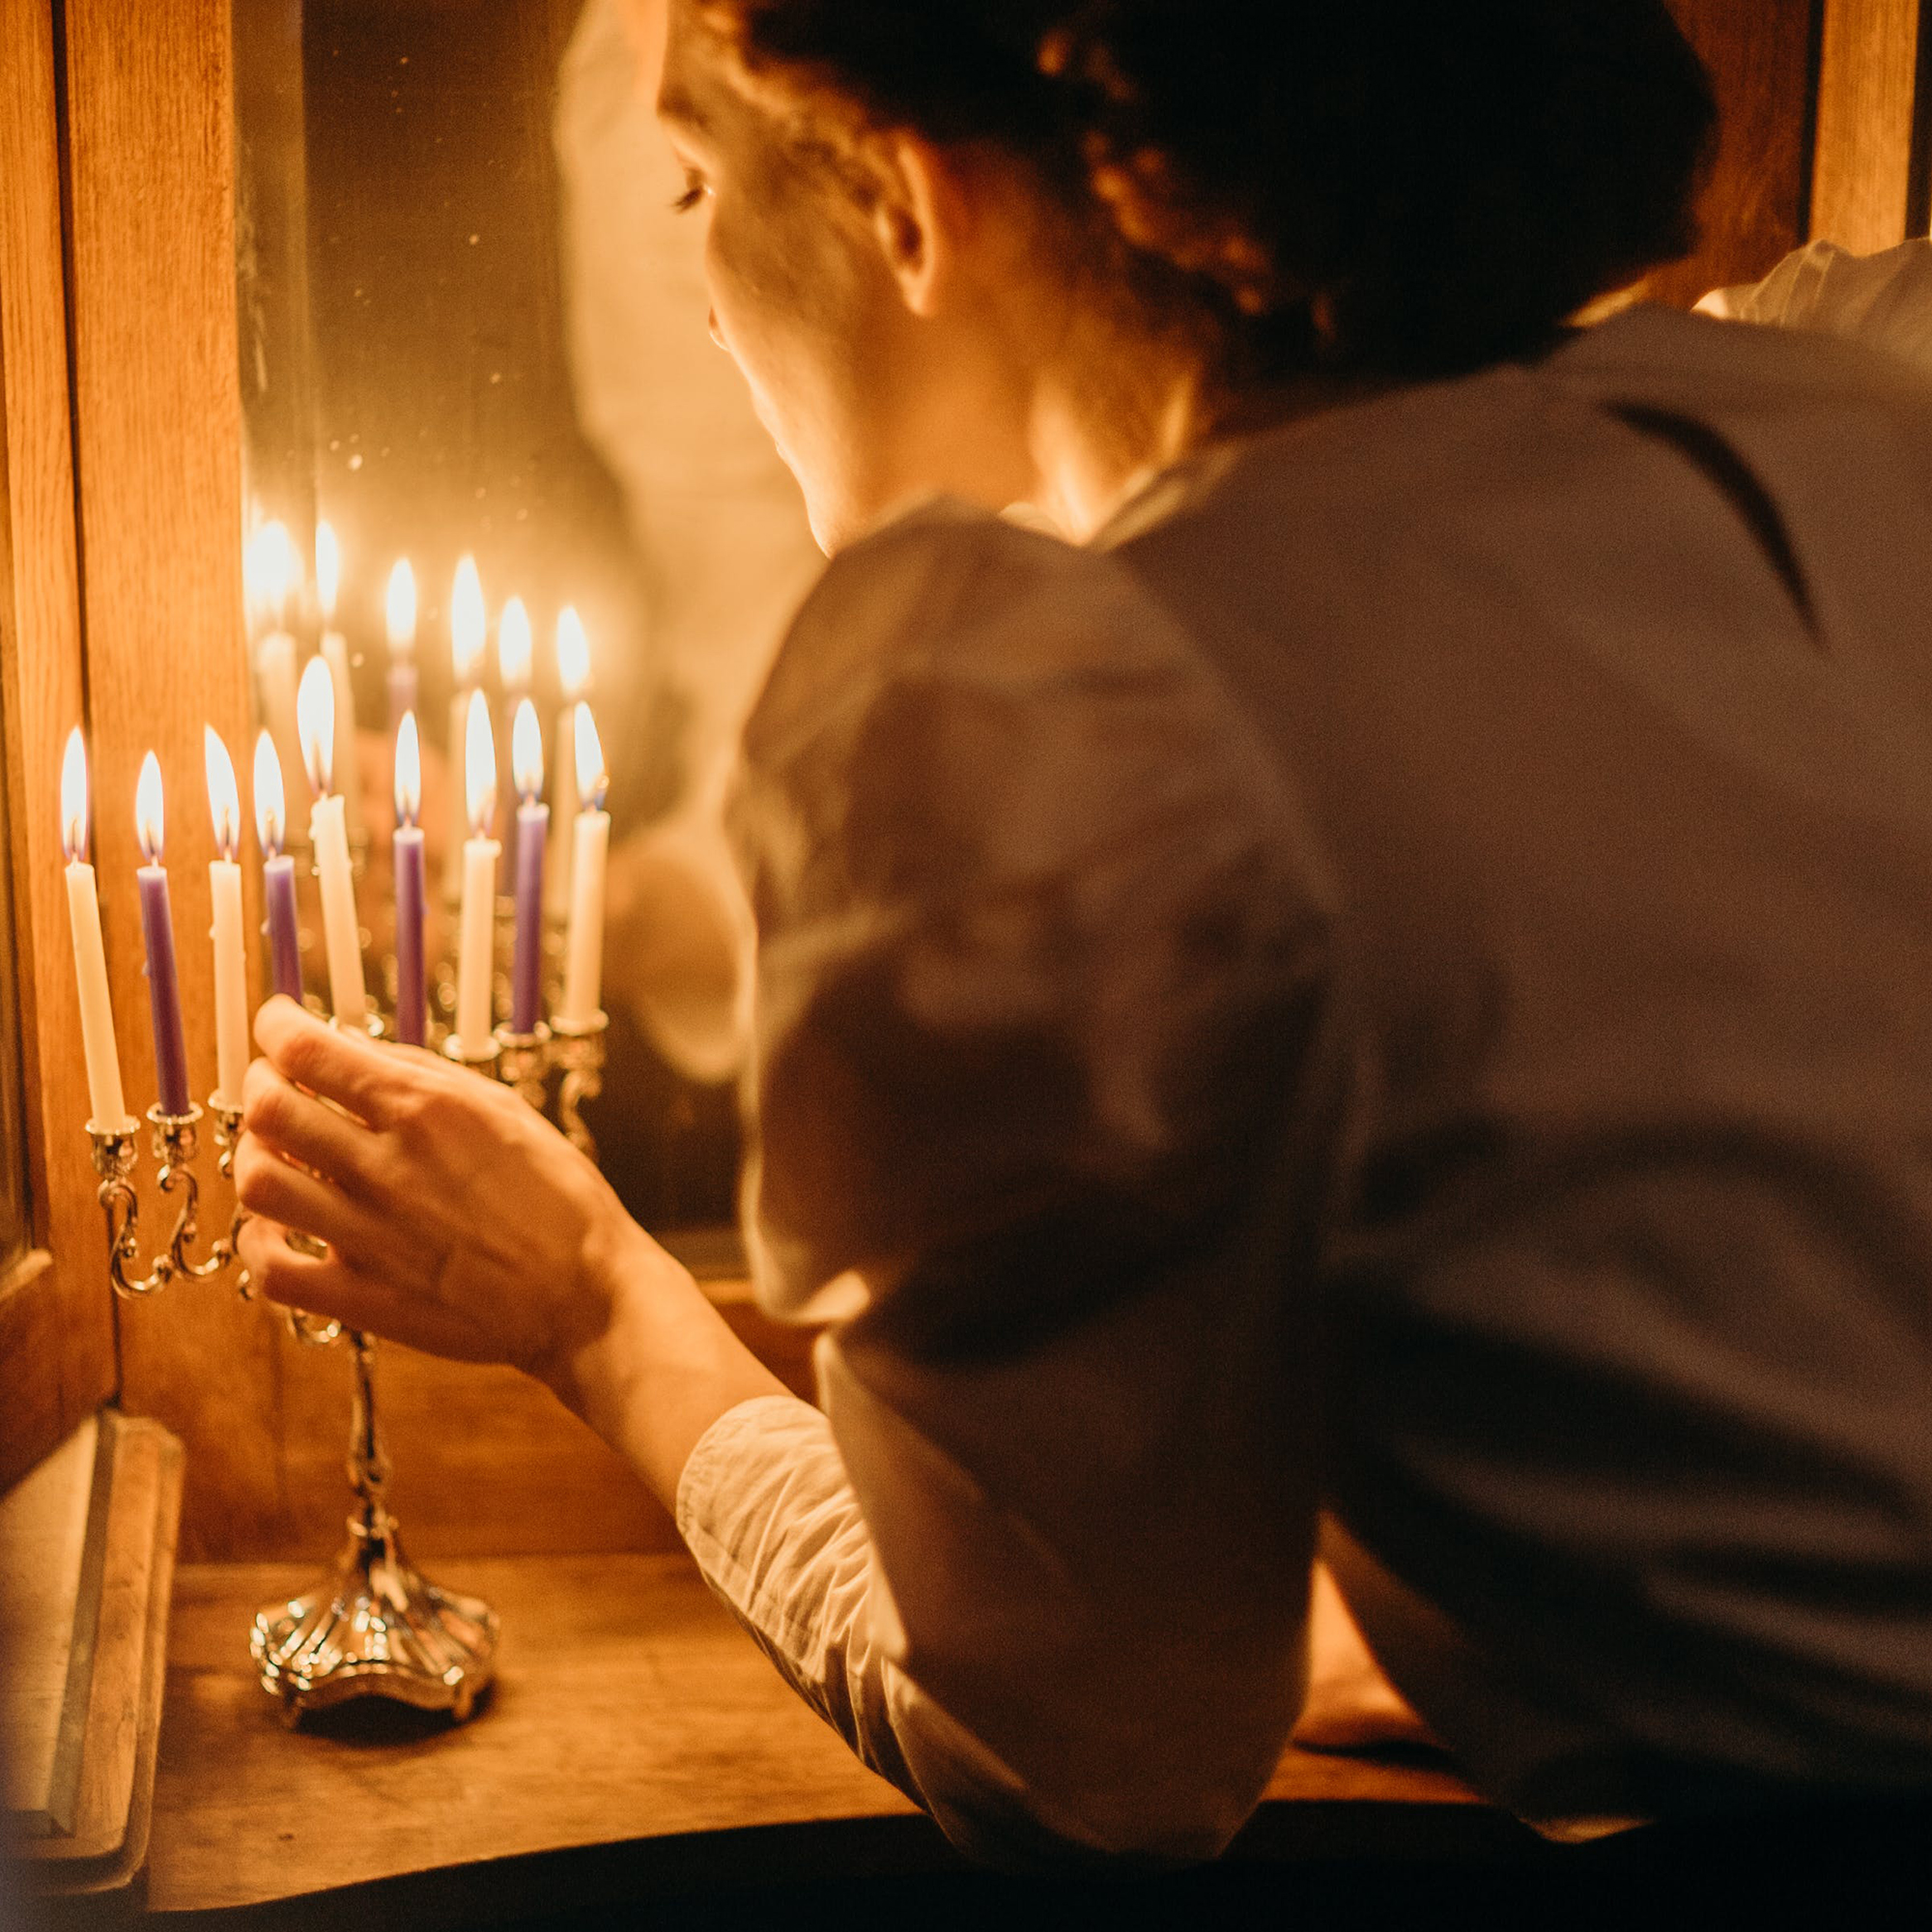 Light Another Candle is a Hanukkah song that wishes for peace in the Holy Land